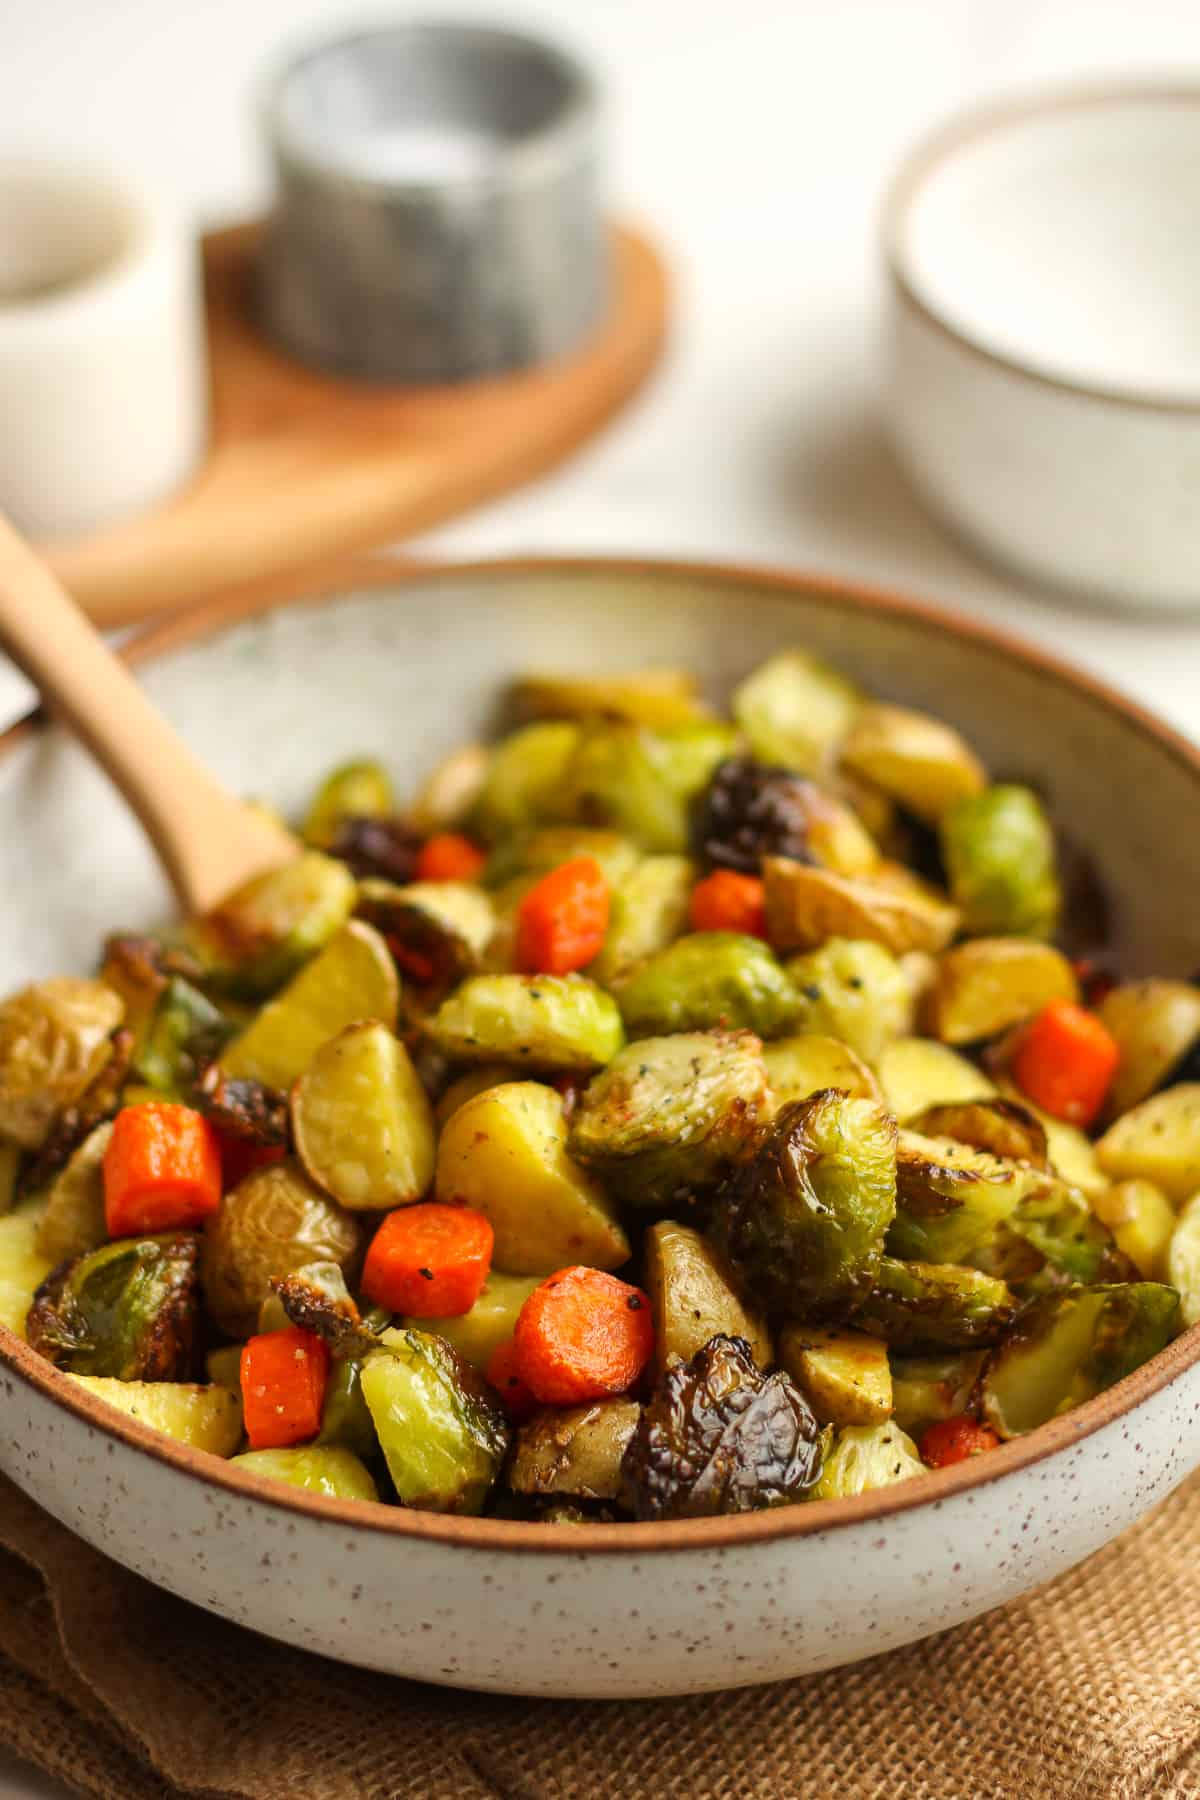 Side view of a bowl of roasted veggies.